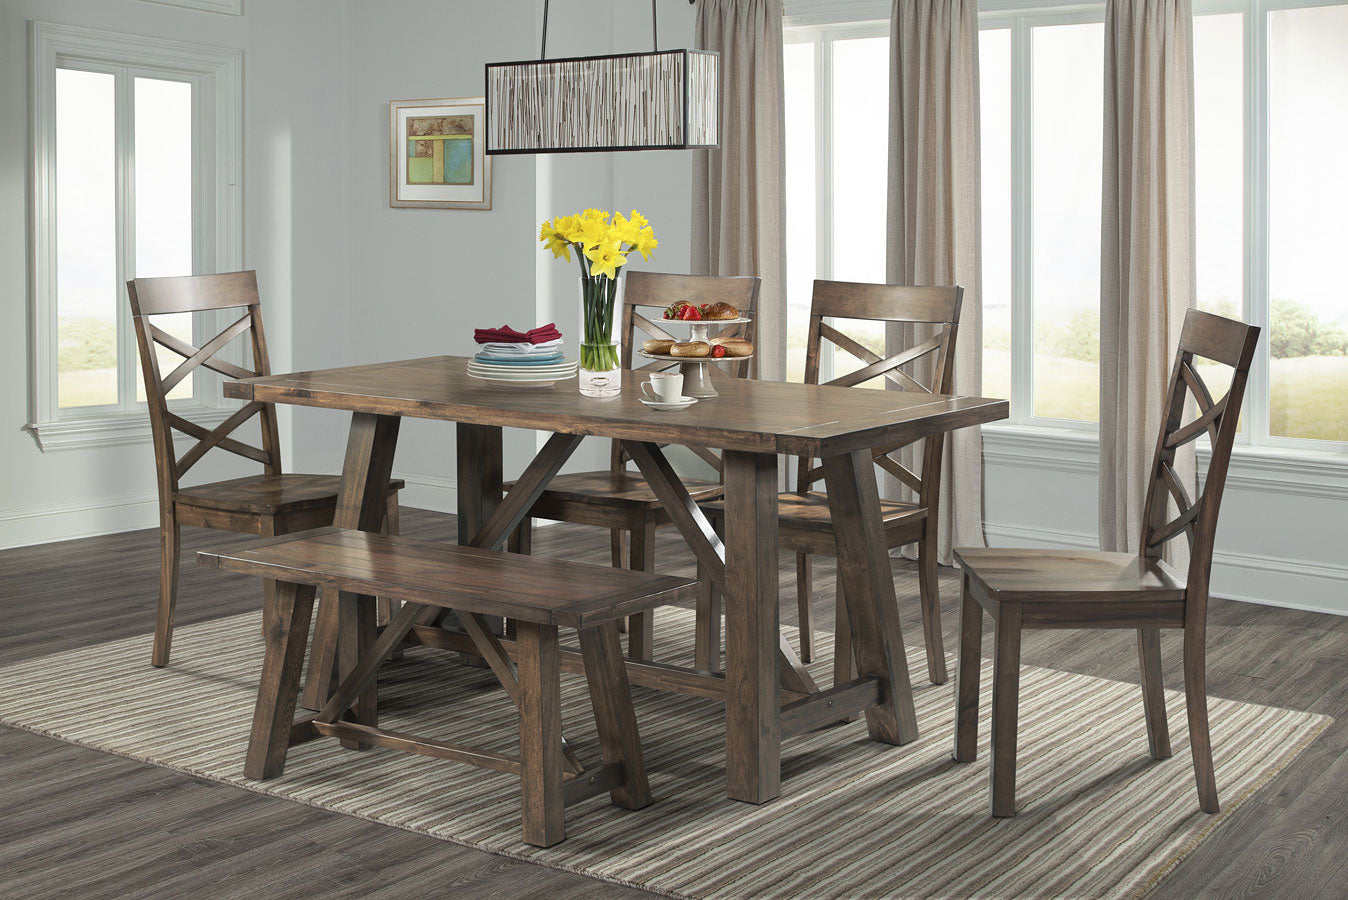 Bailee 6 piece Solid Wood Dining Room Set #6022